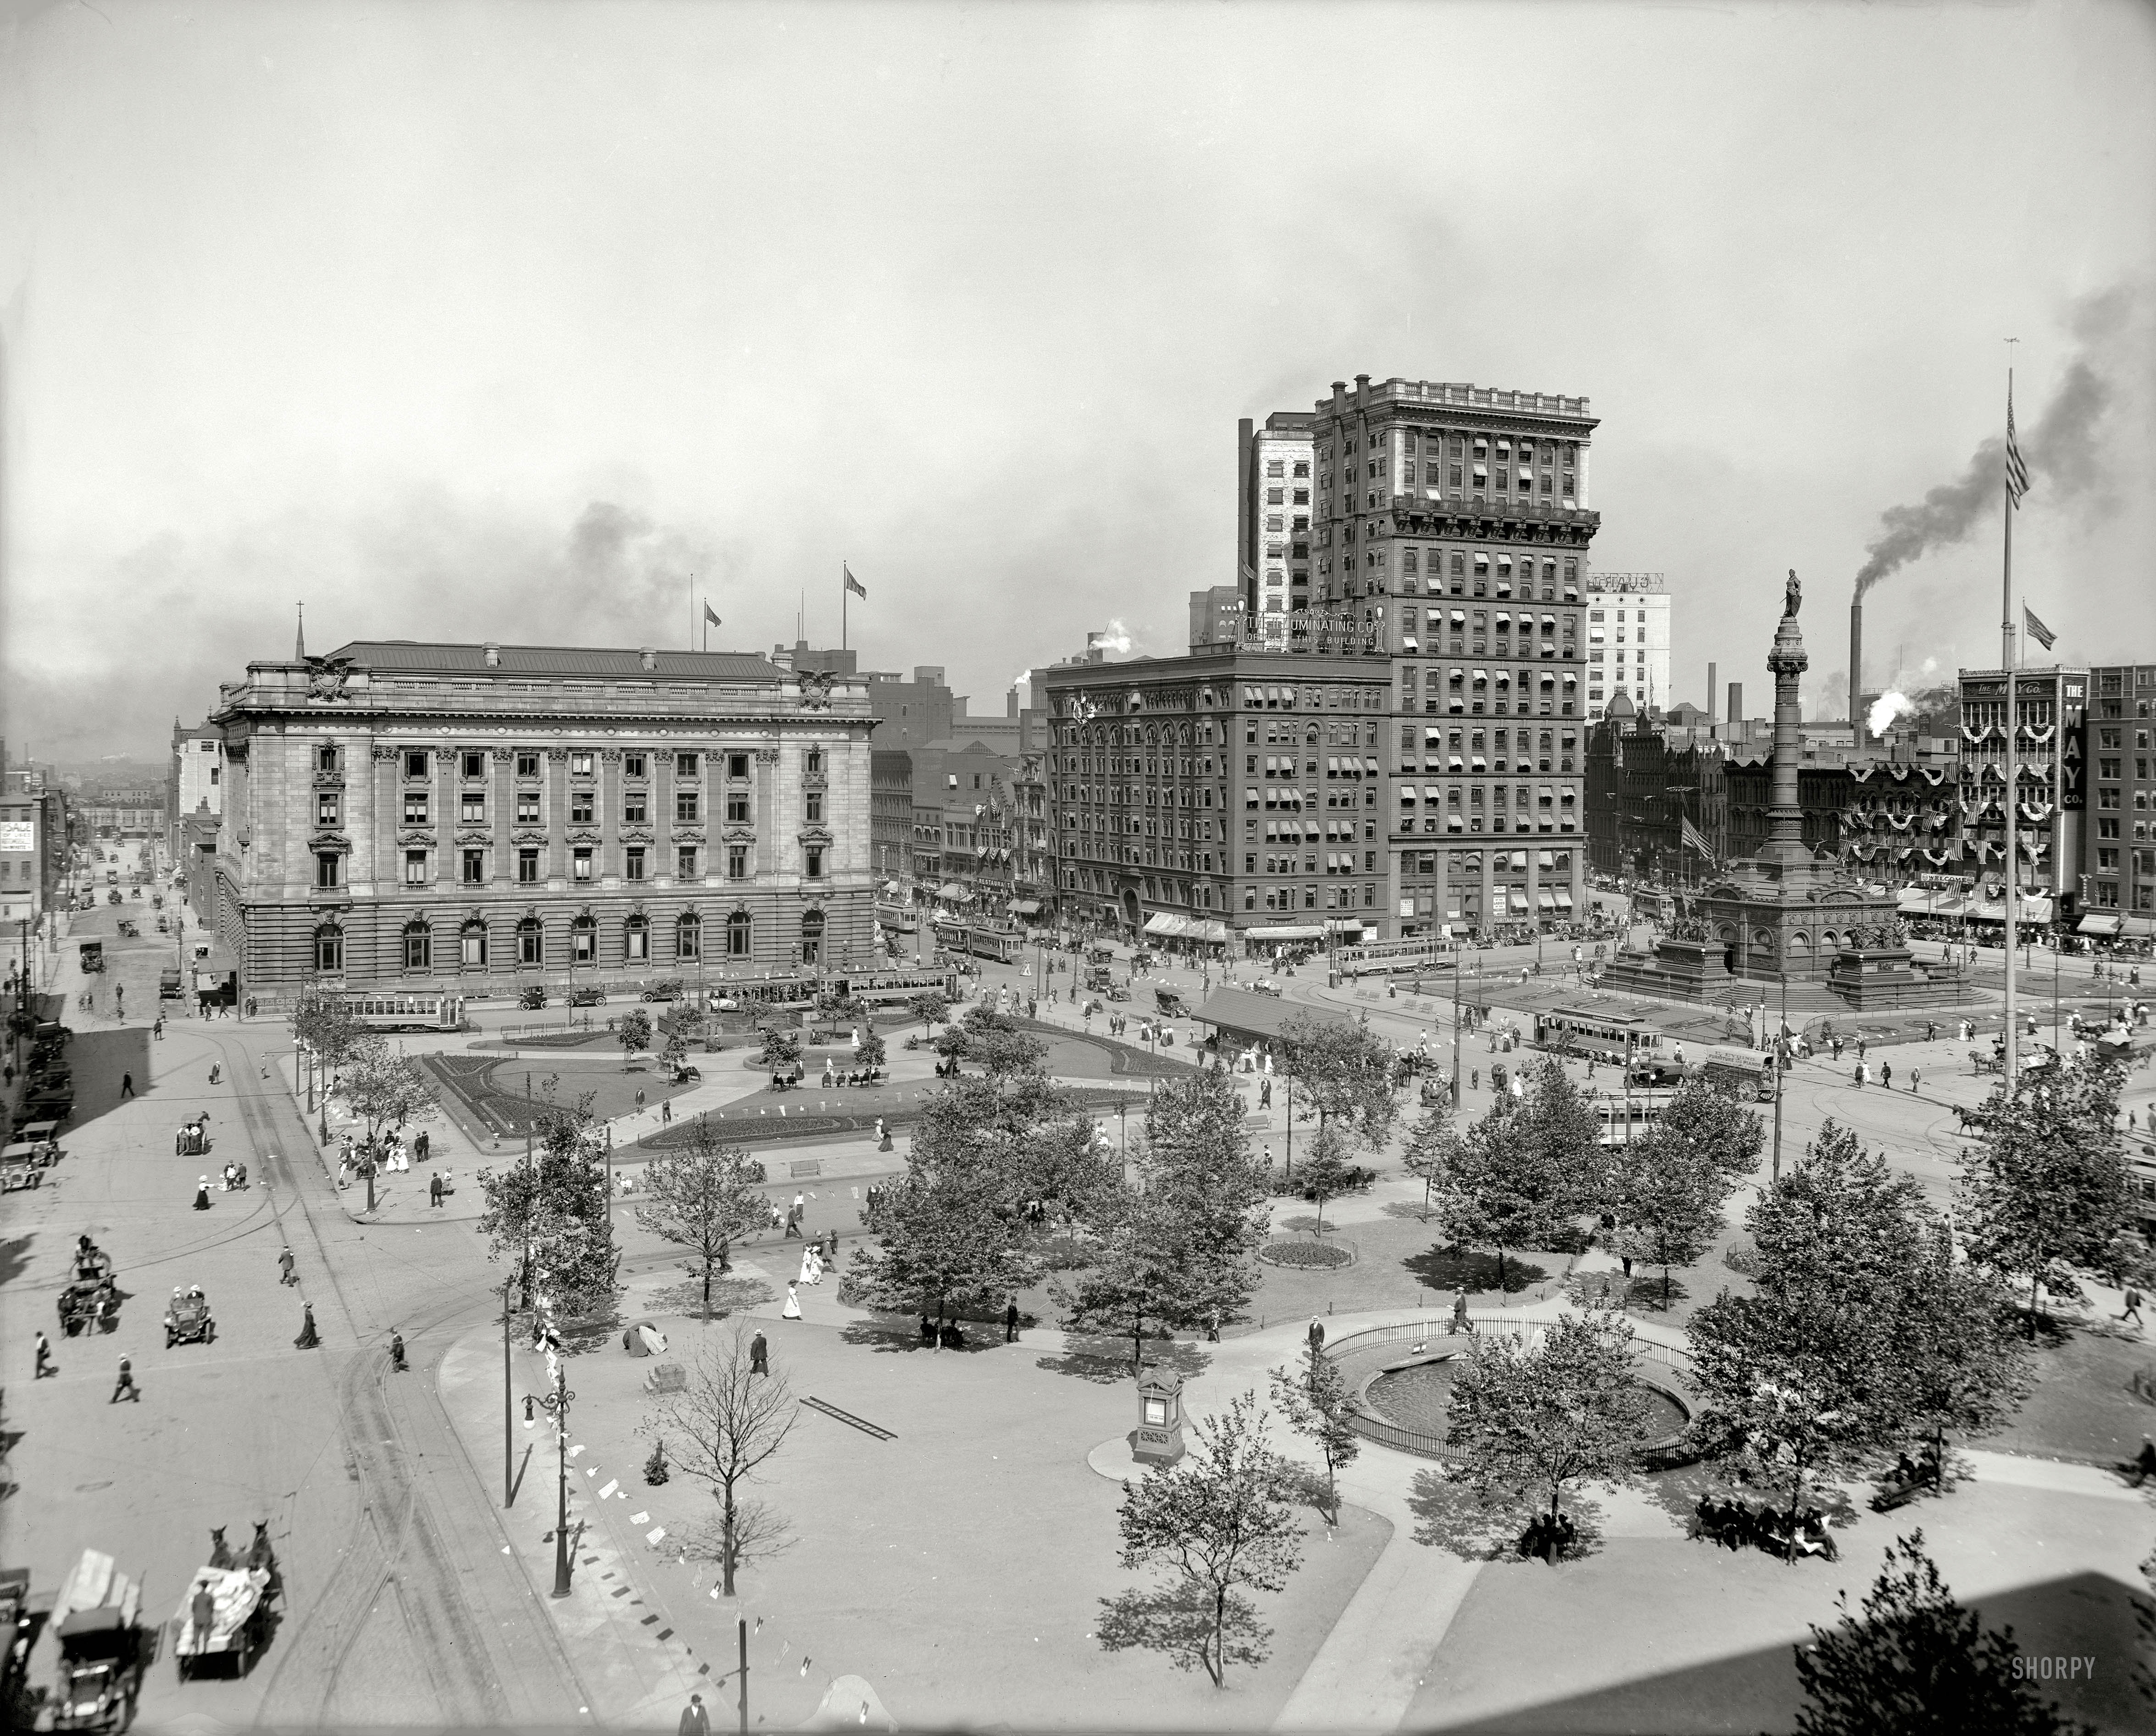 Cleveland, Ohio, circa 1911. "The Public Square -- Soldiers' and Sailors' Monument." A bustling scene, patriotically decorated. View full size.